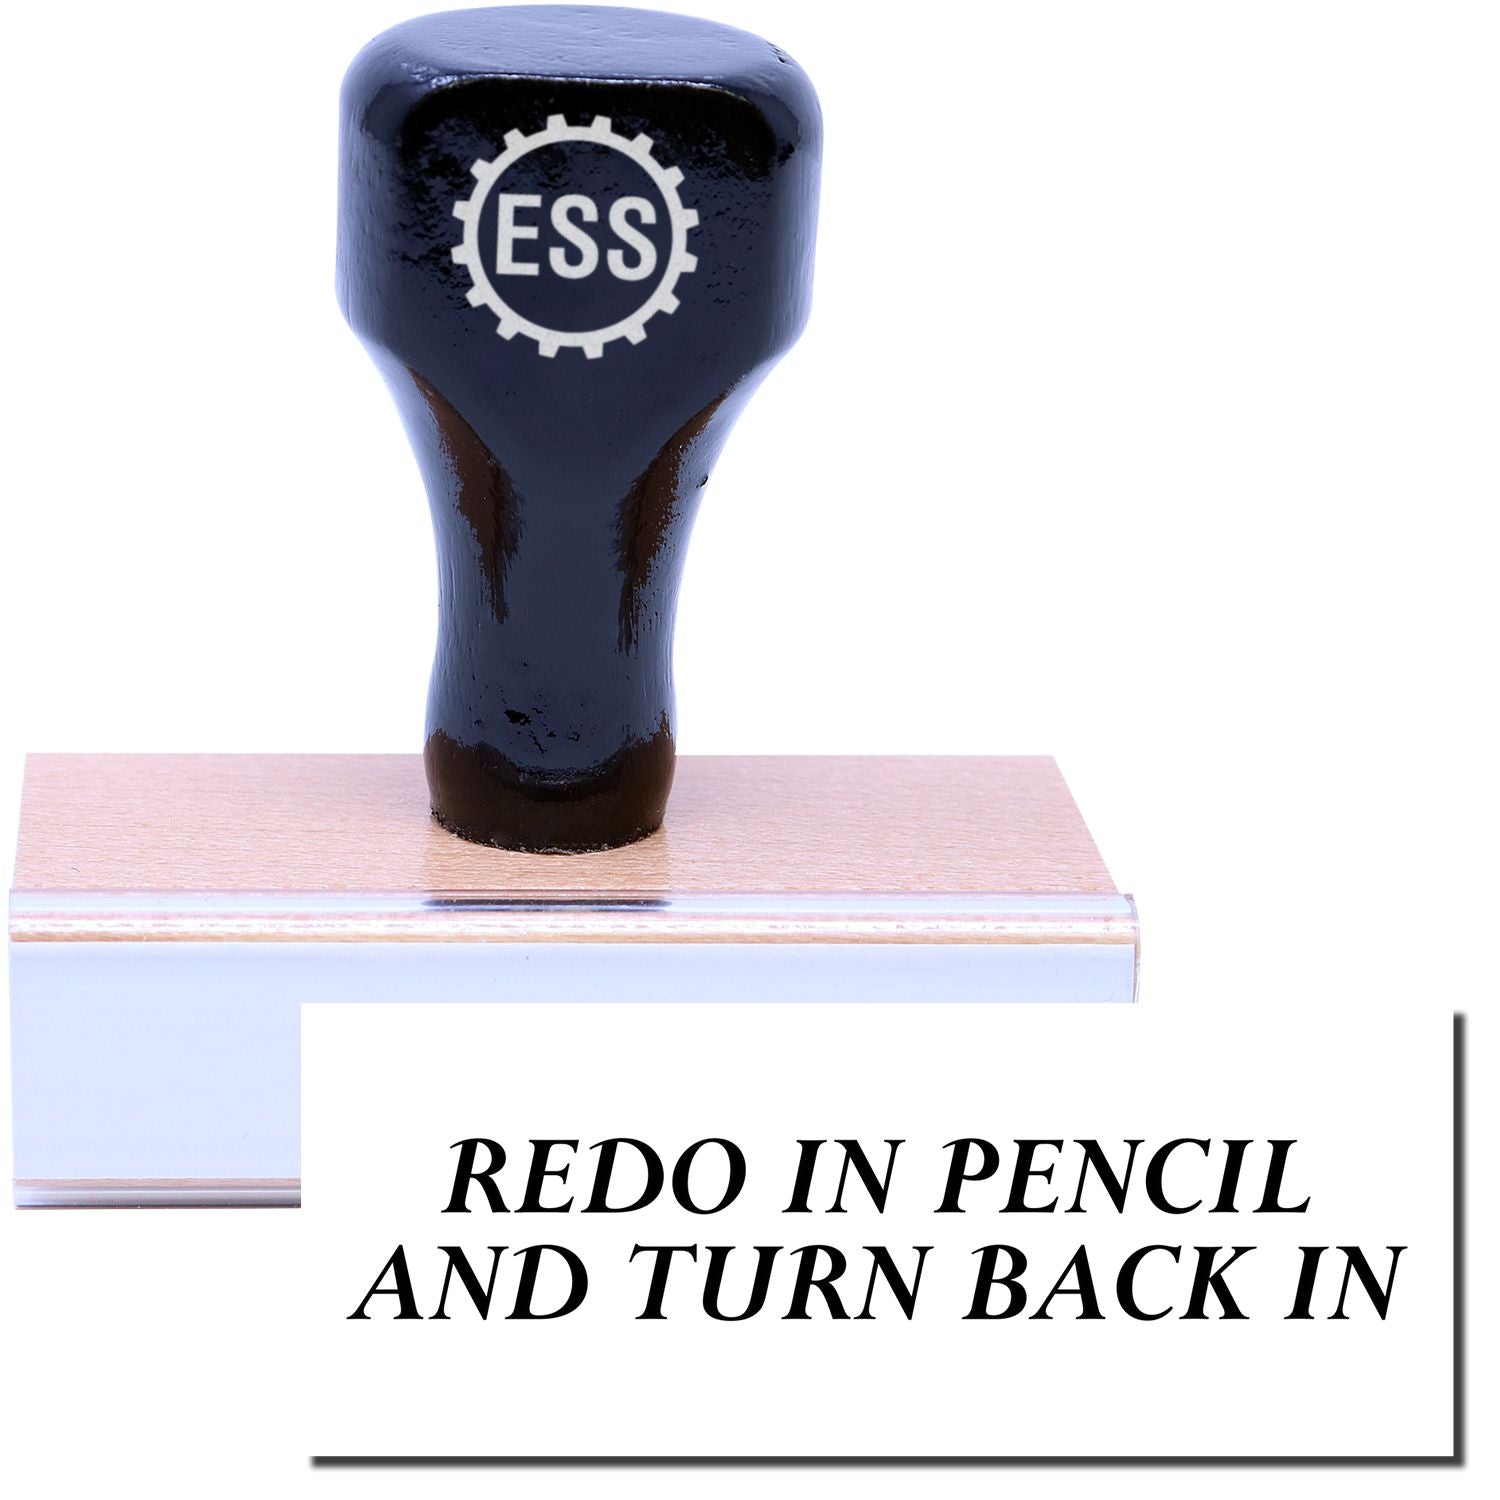 A stock office rubber stamp with a stamped image showing how the text "REDO IN PENCIL AND TURN BACK IN" is displayed after stamping.